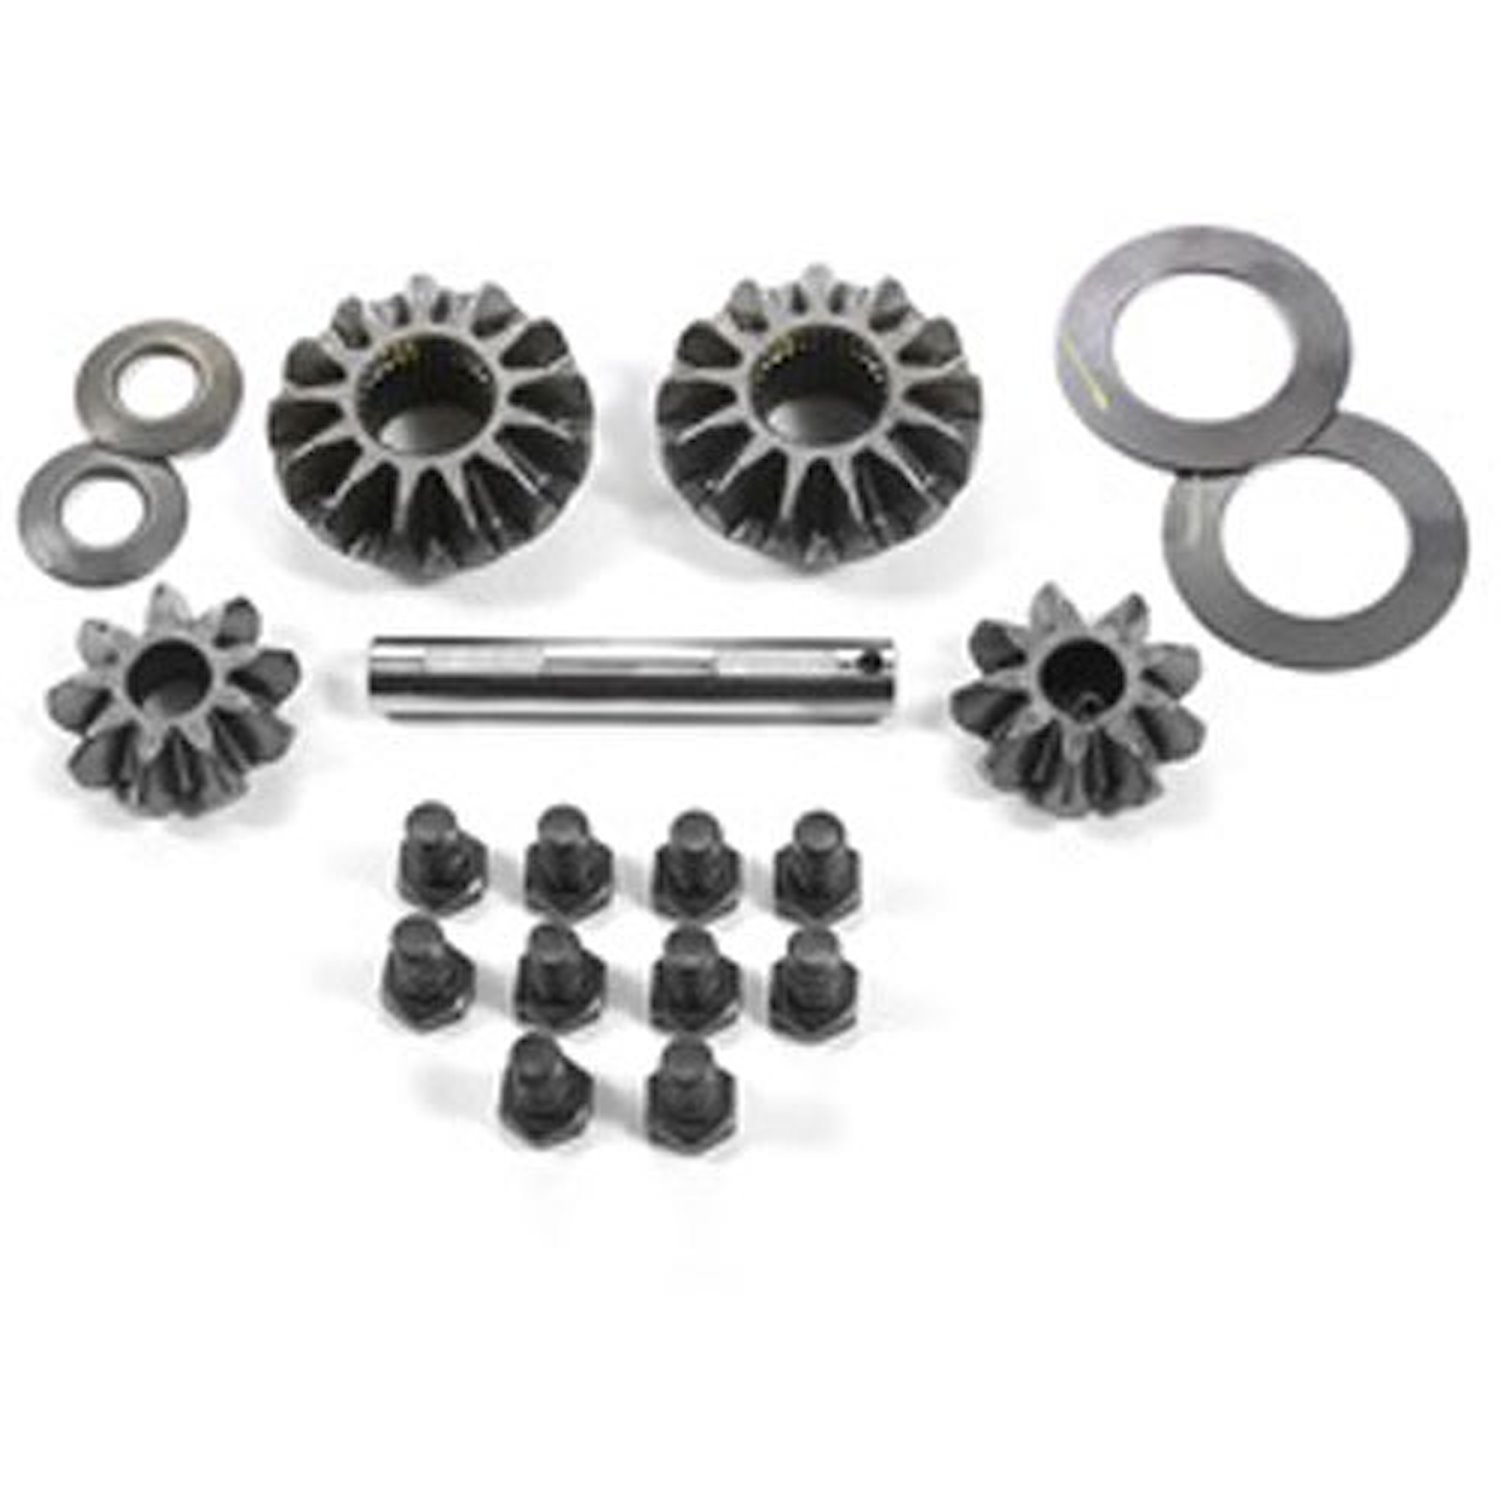 This differential spider gear set from Omix-ADA fits the rear Dana 44 axle found in 07-16 Jeep Wrang